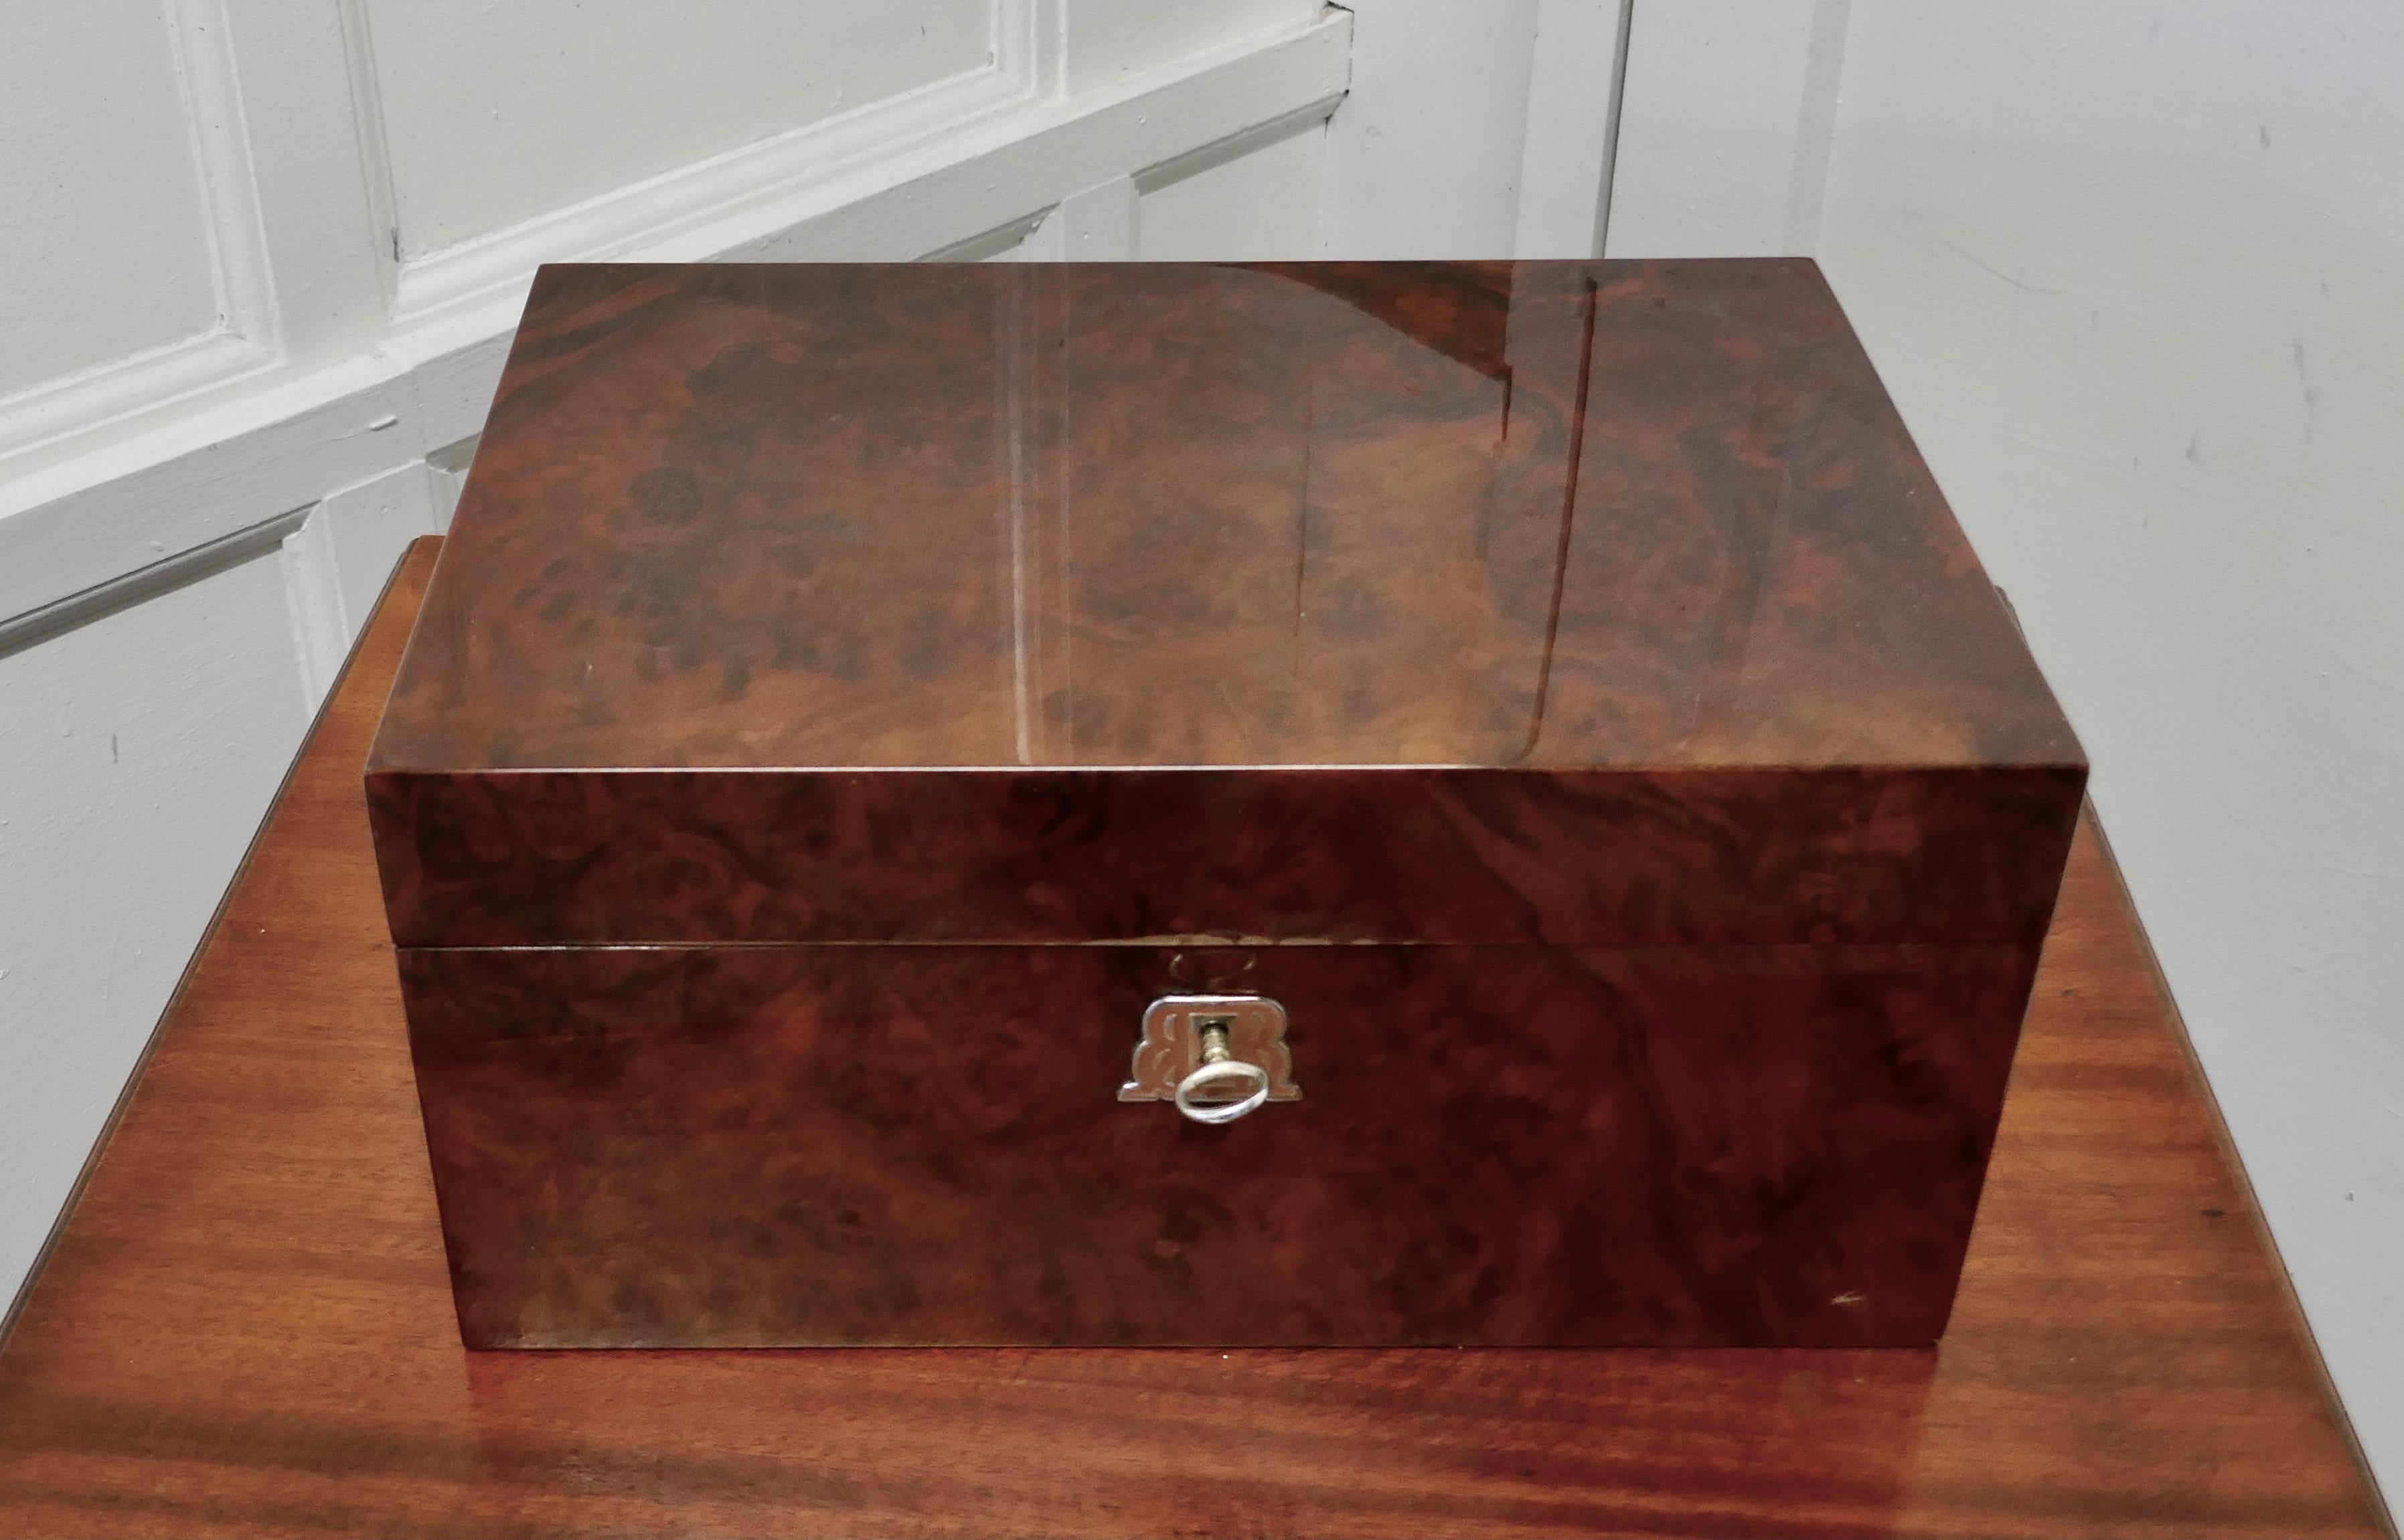 A fine quality burr walnut humidor made by Boisseliers du Rif 


Boisseliers du Rif are leaders in high end wood manufacturing, the name is synonymous with quality and high end finishing. 
This piece is a Humidor with removable tray made in the